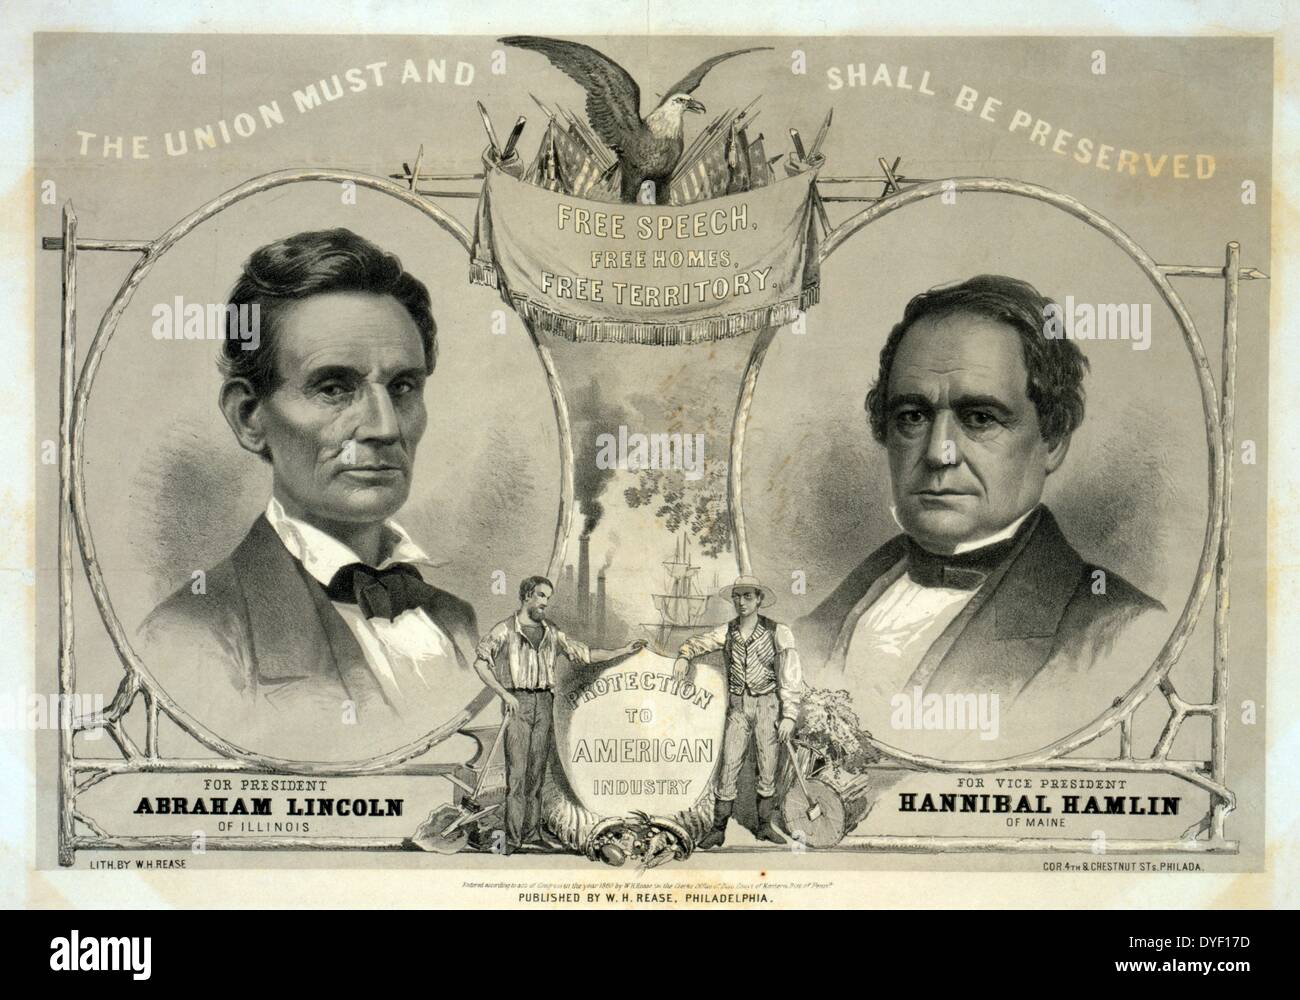 The Union must and shall be preserved. (Vote) For President Abraham Lincoln of Illinois. For Vice President Hannibal Hamlin of Stock Photo